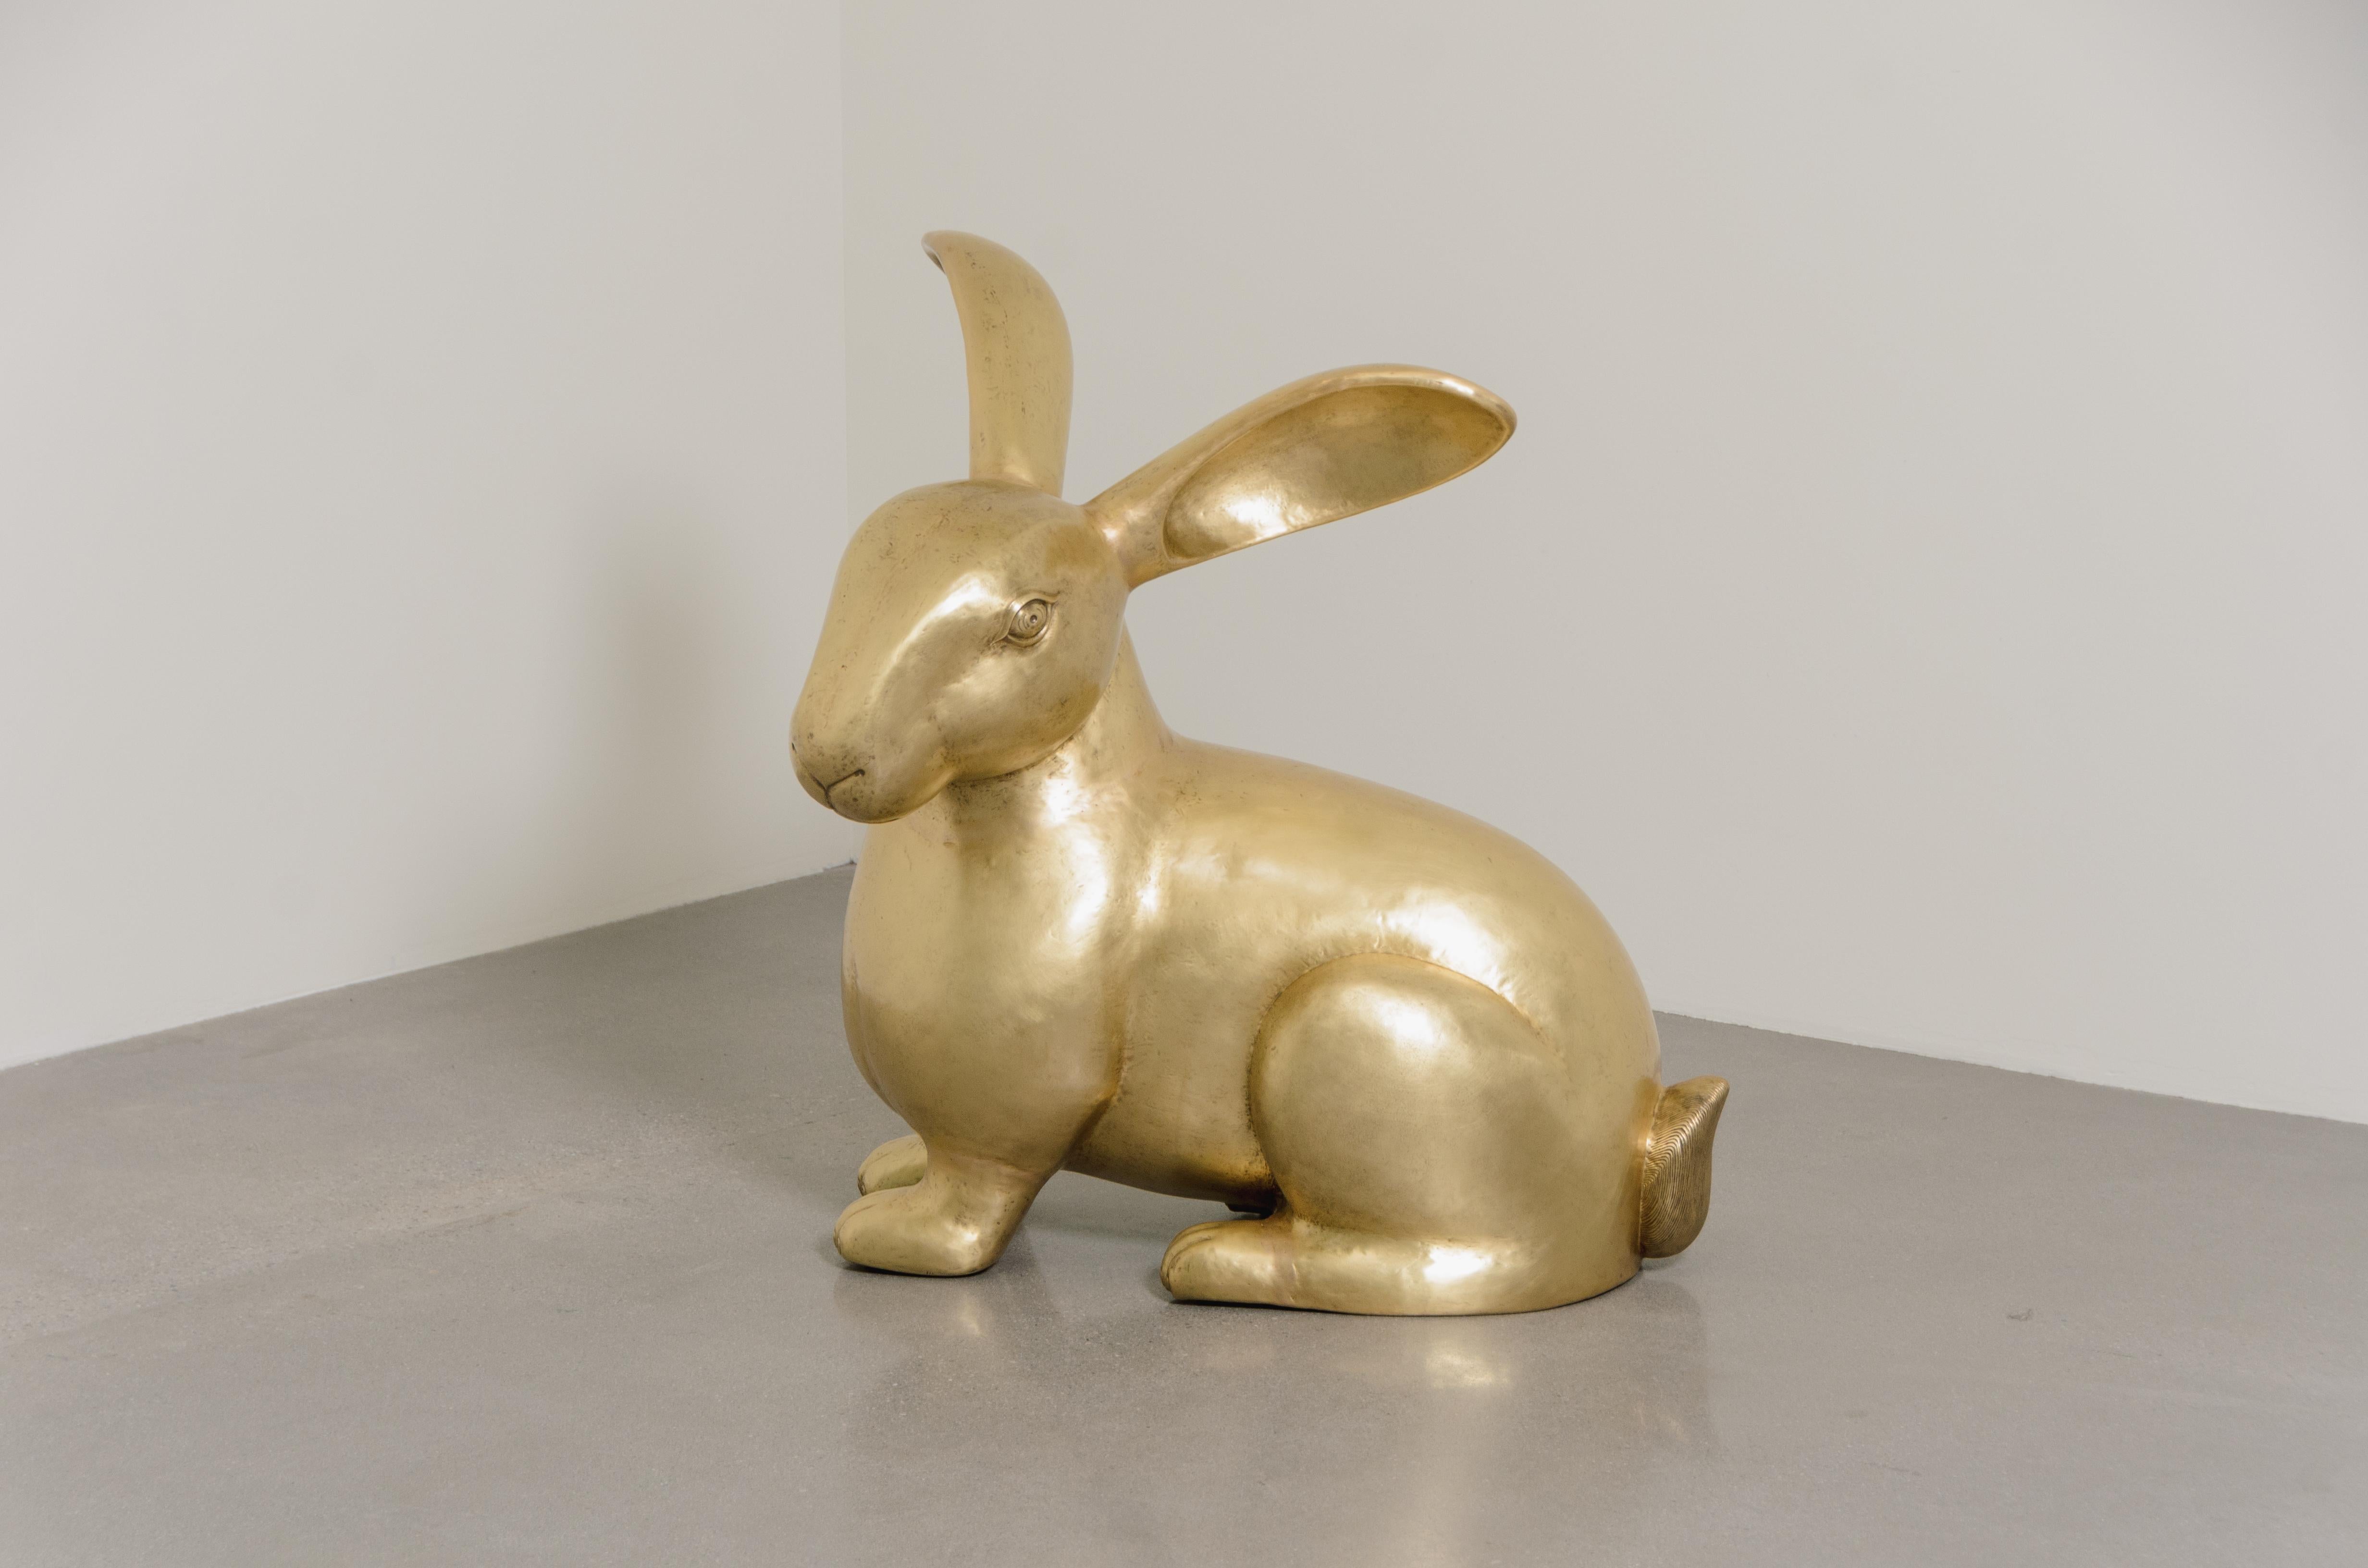 Hammered Contemporary Rabbit Sculpture in Brass by Robert Kuo, Hand Repoussé, Limited For Sale